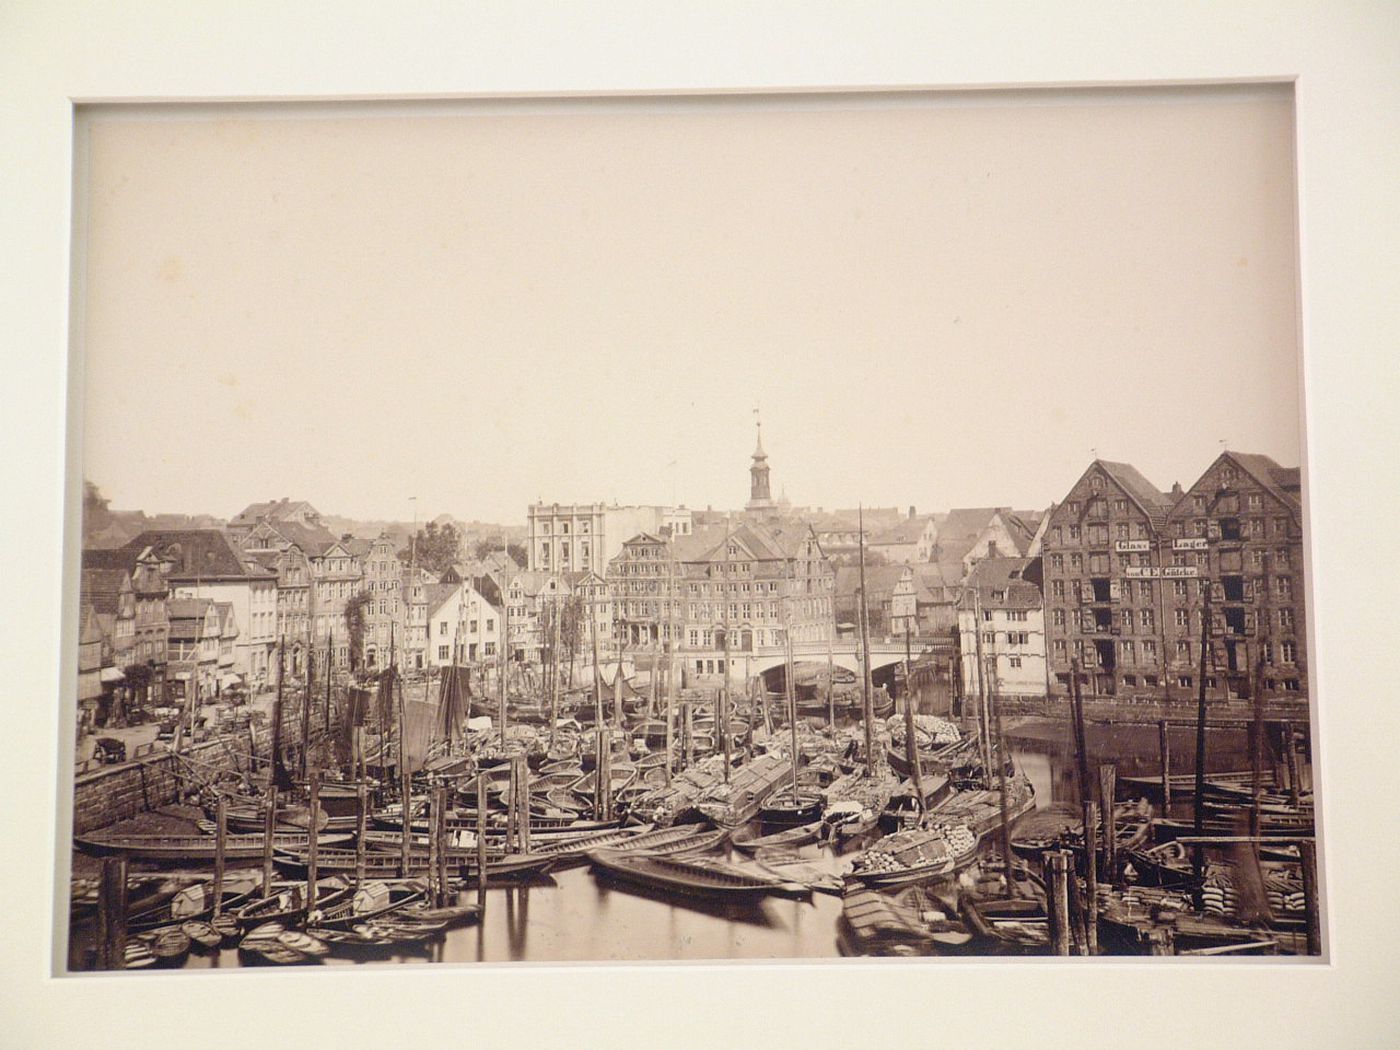 General view of quay, ships, and surrounding structures, Hamburg, Germany